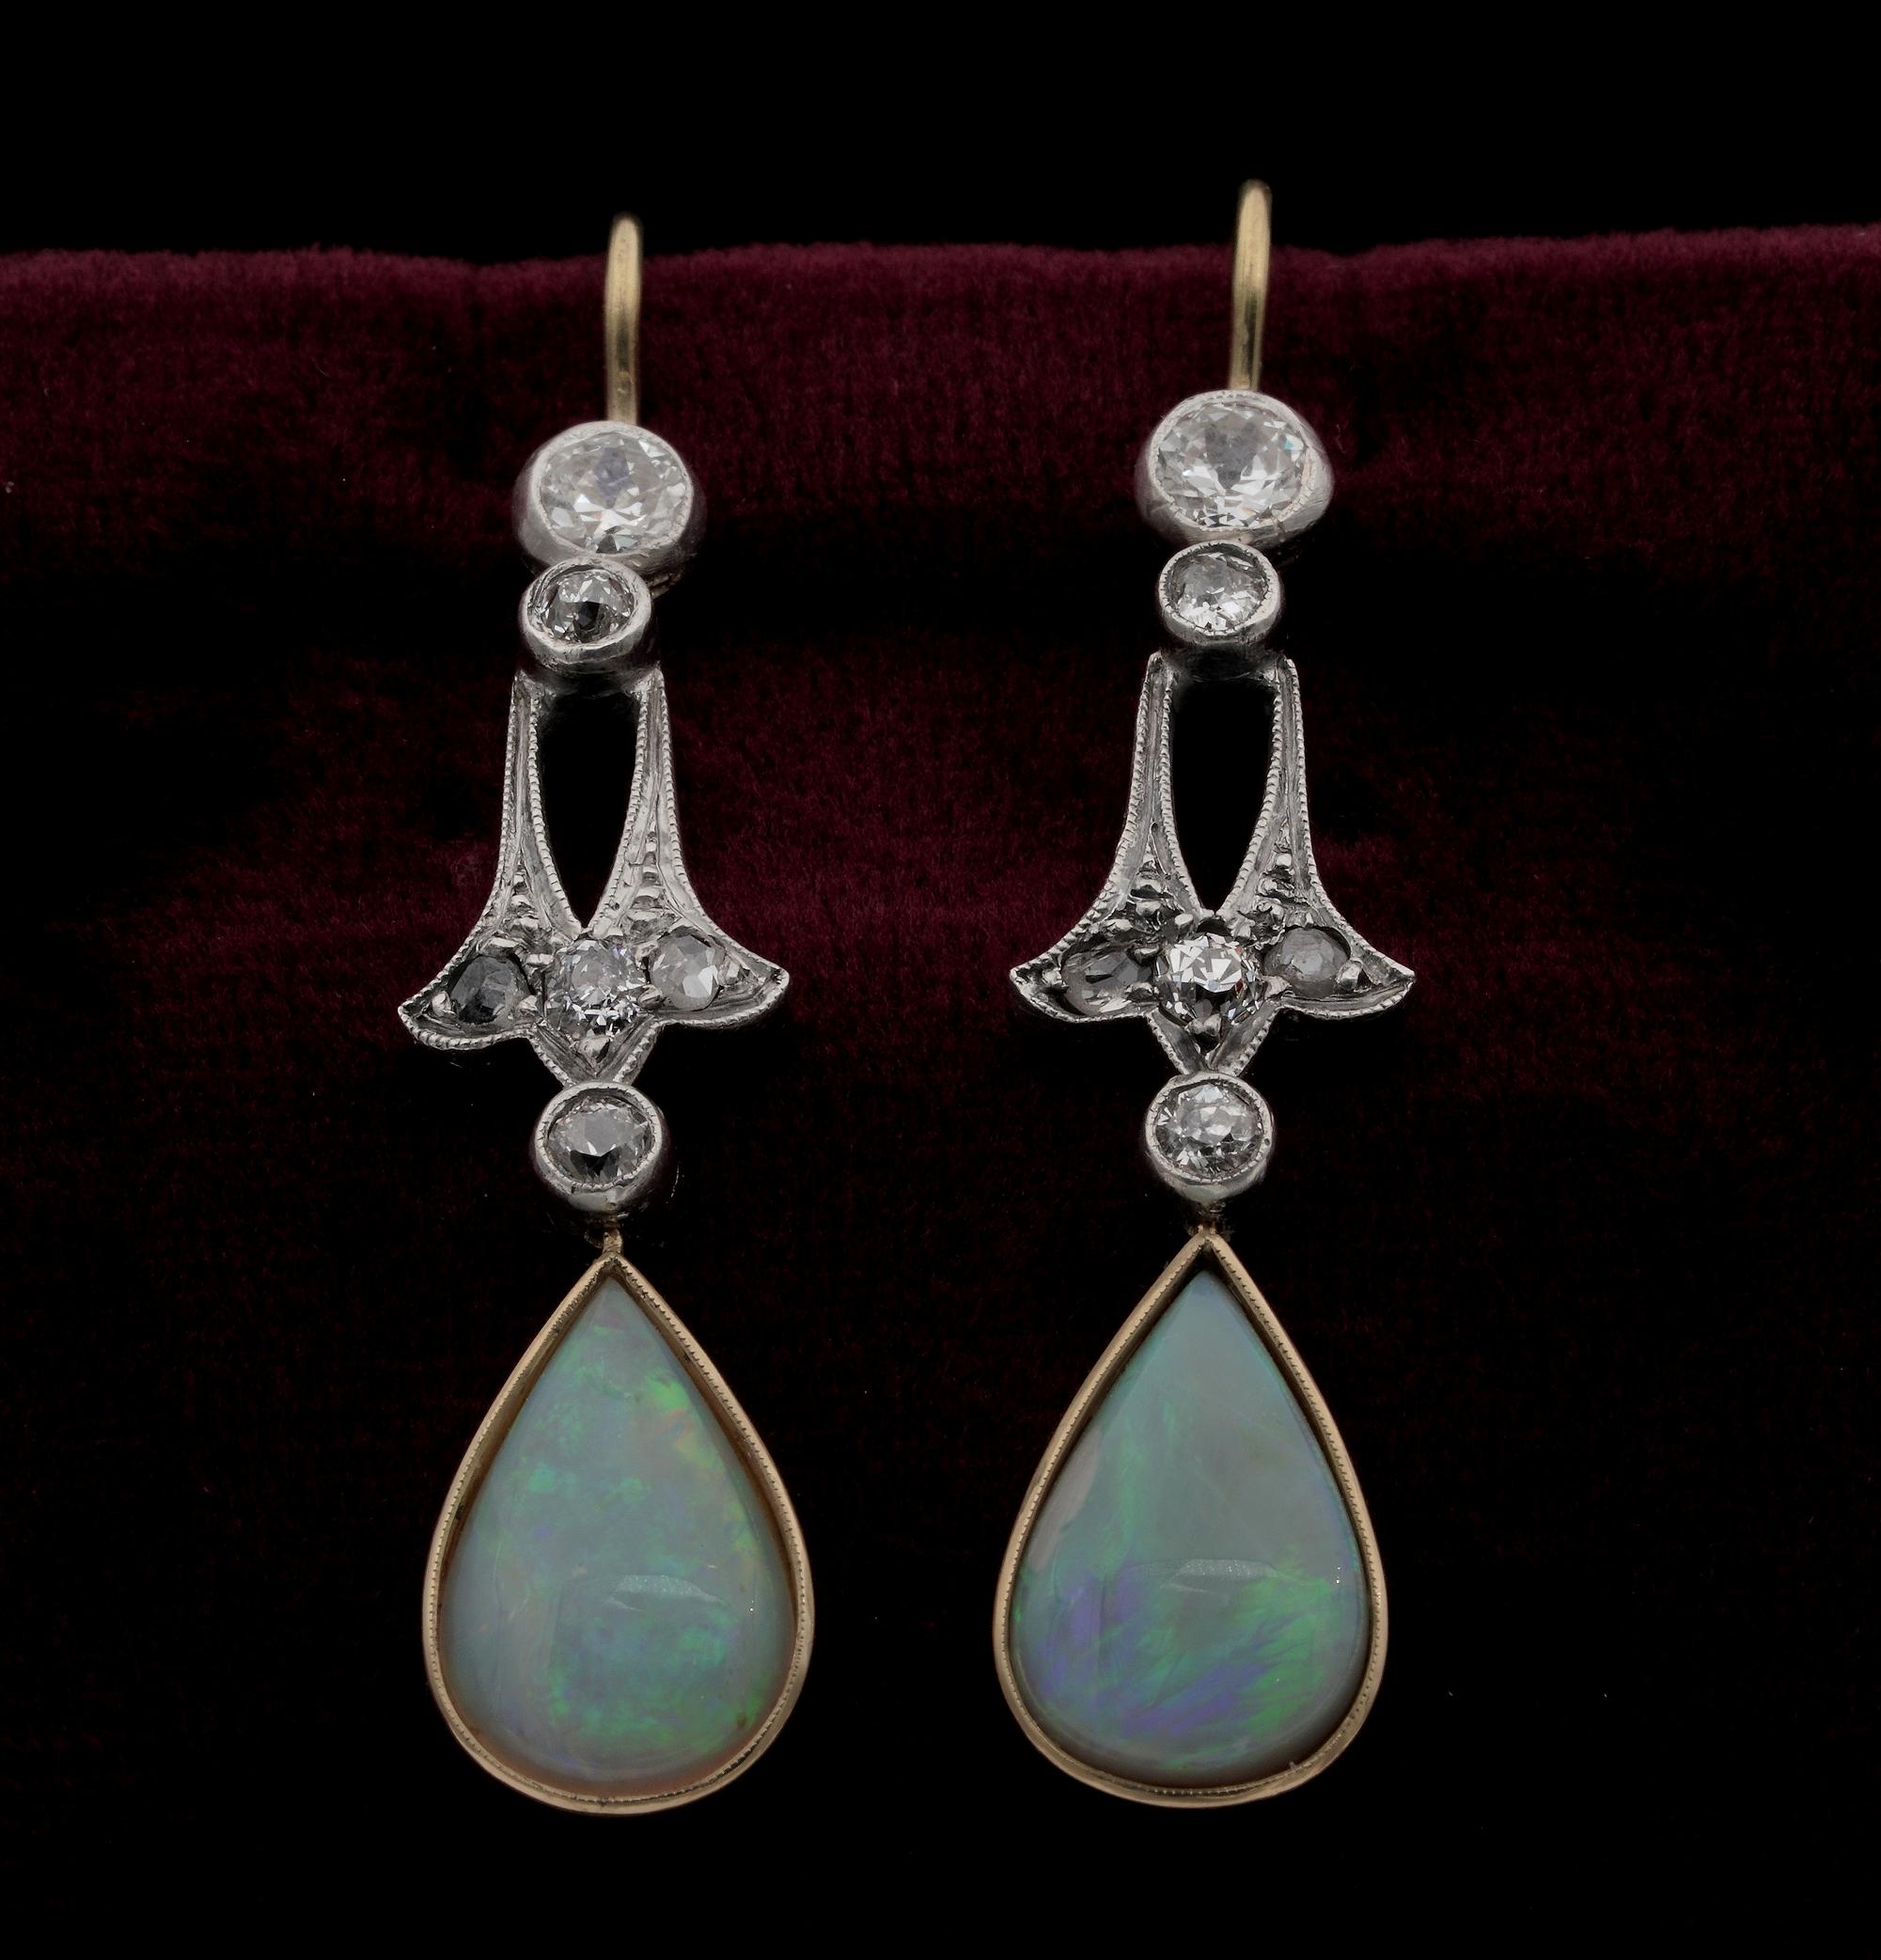 Grace and Femininity

Past charm and grace expressed in these beautiful pair of Edwardian period Opal & Diamond ear drops
Fine hand crafting of the period of solid 18 KT gold topped by silver at some points
Top line is of graceful sinuous lines with